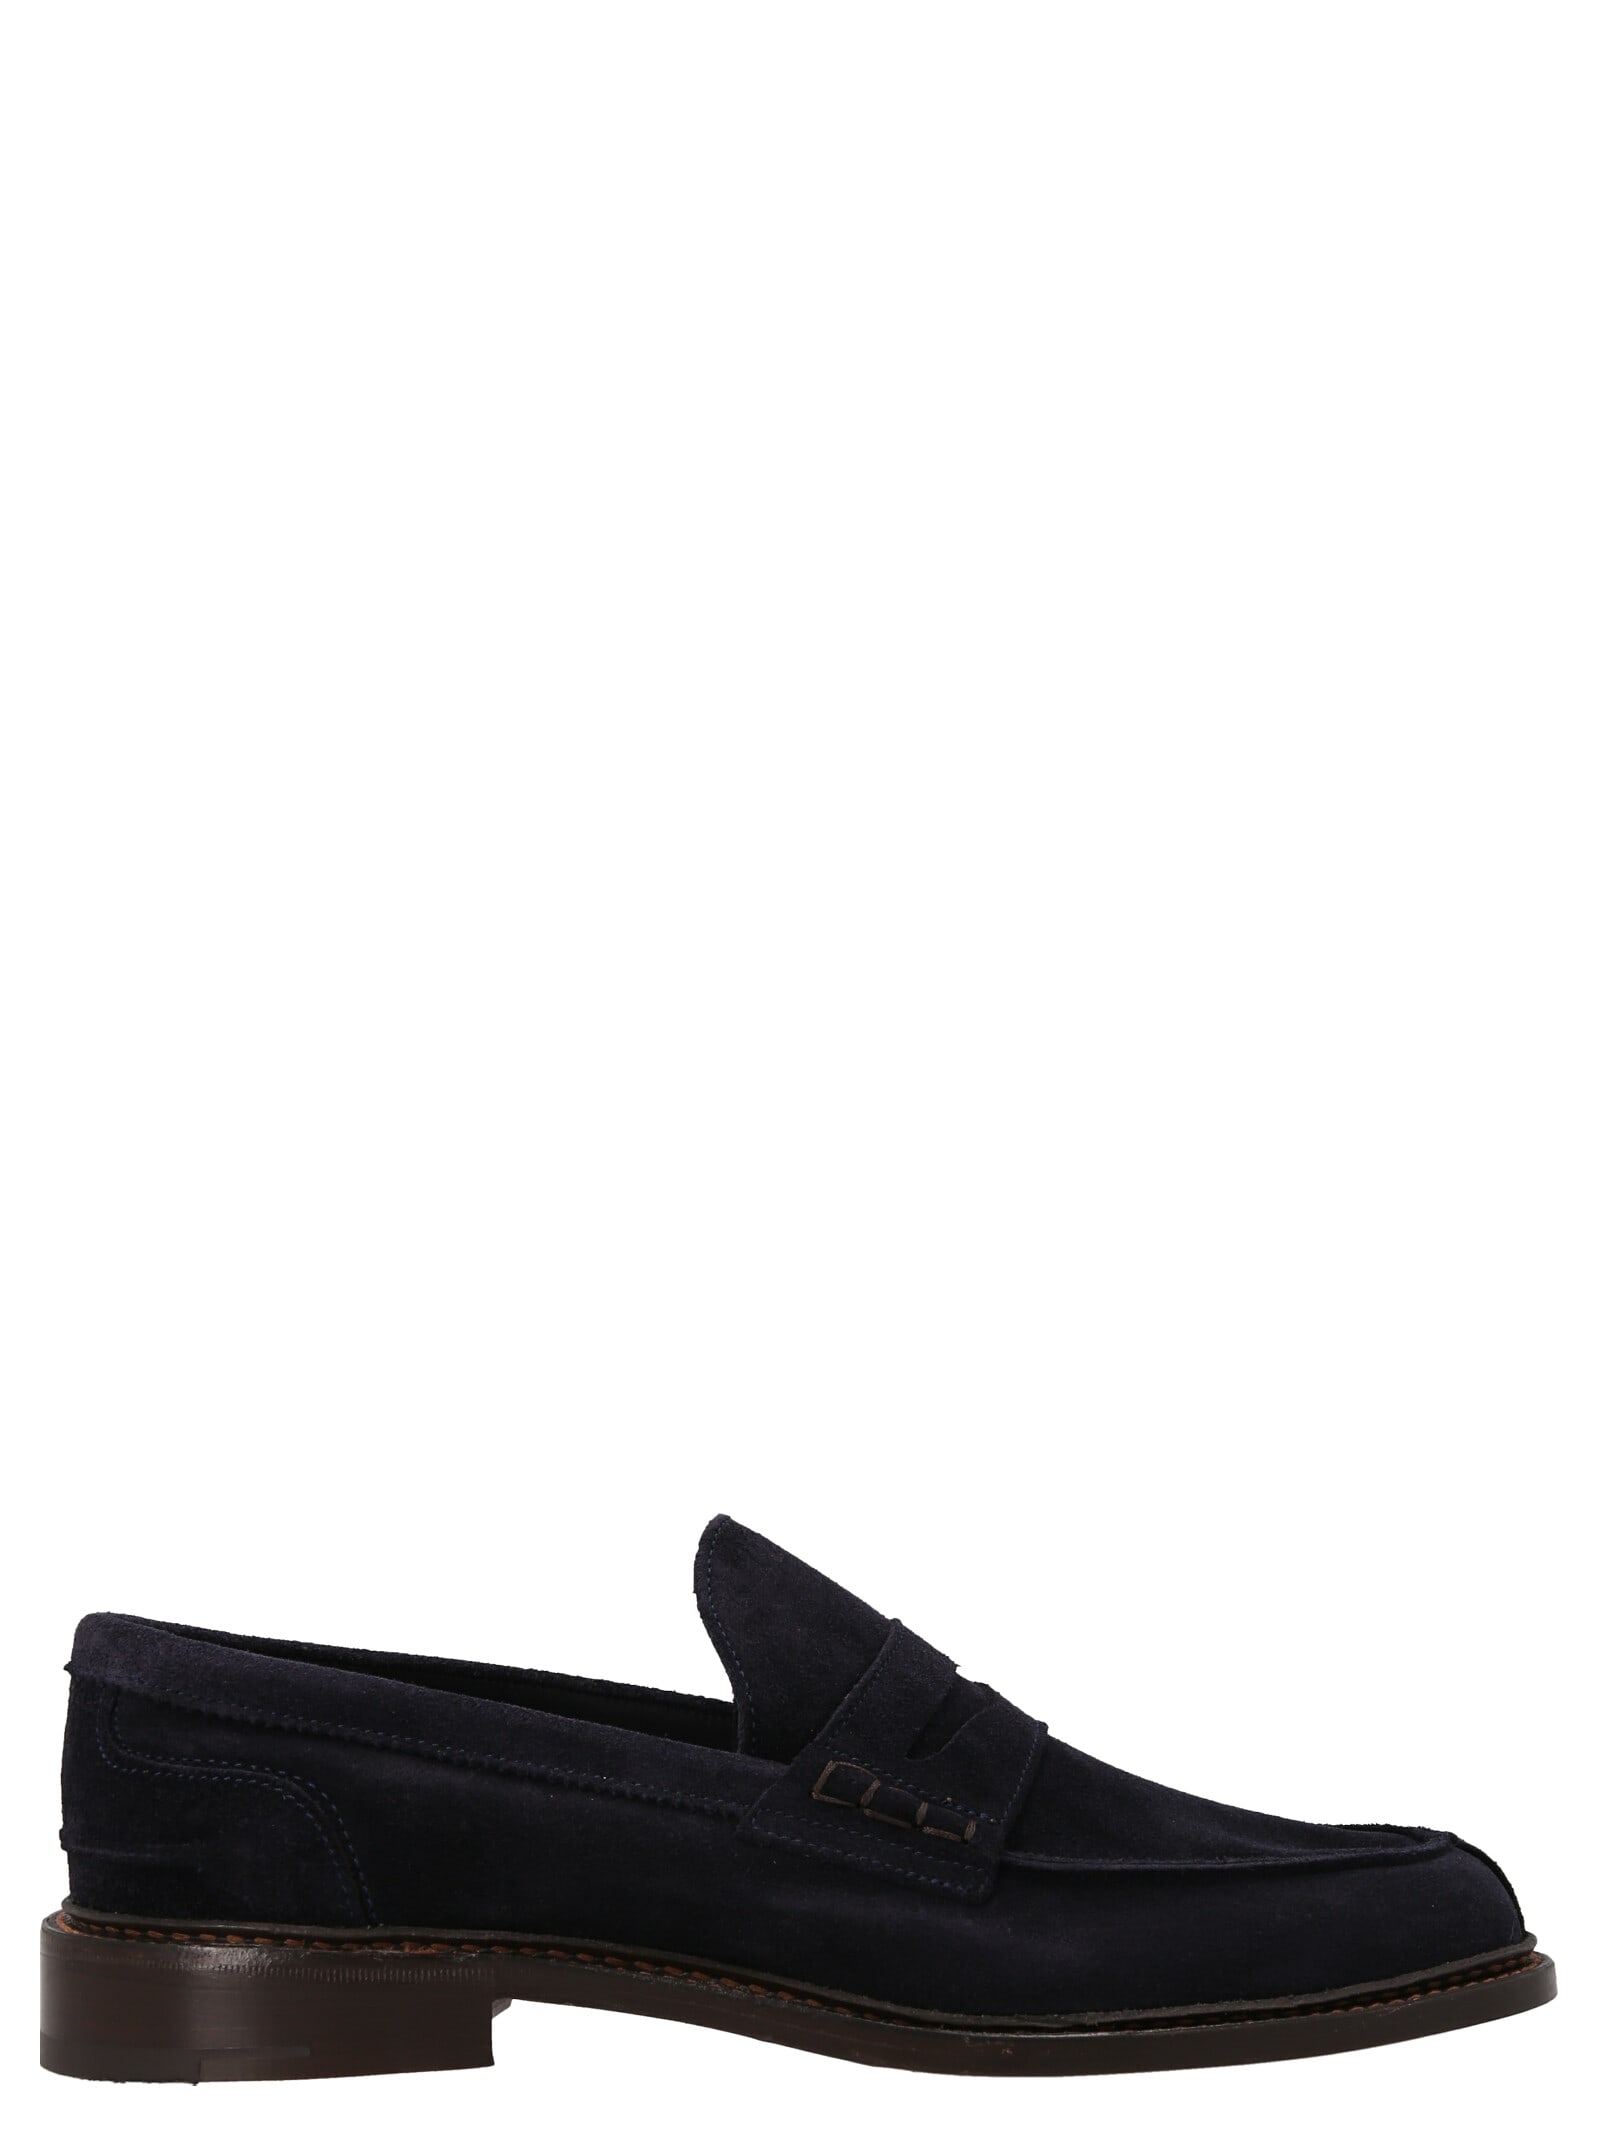 TRICKER'S COLLEGE LOAFERS